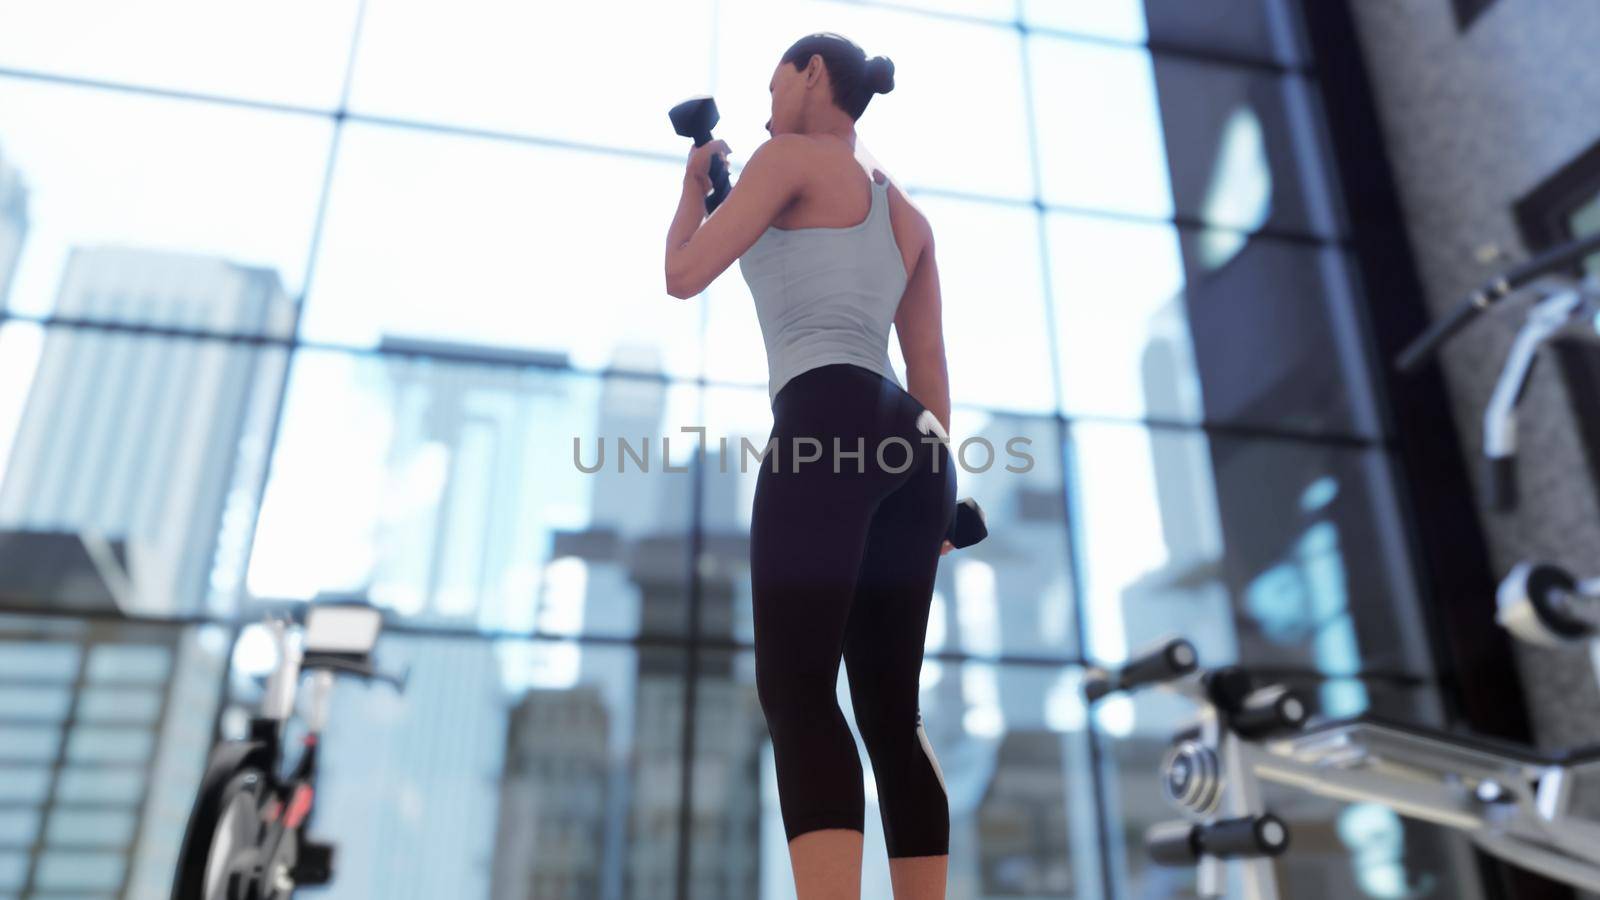 Gym with a variety of exercise equipment and a sportswoman doing sports. 3D Rendering by designprojects